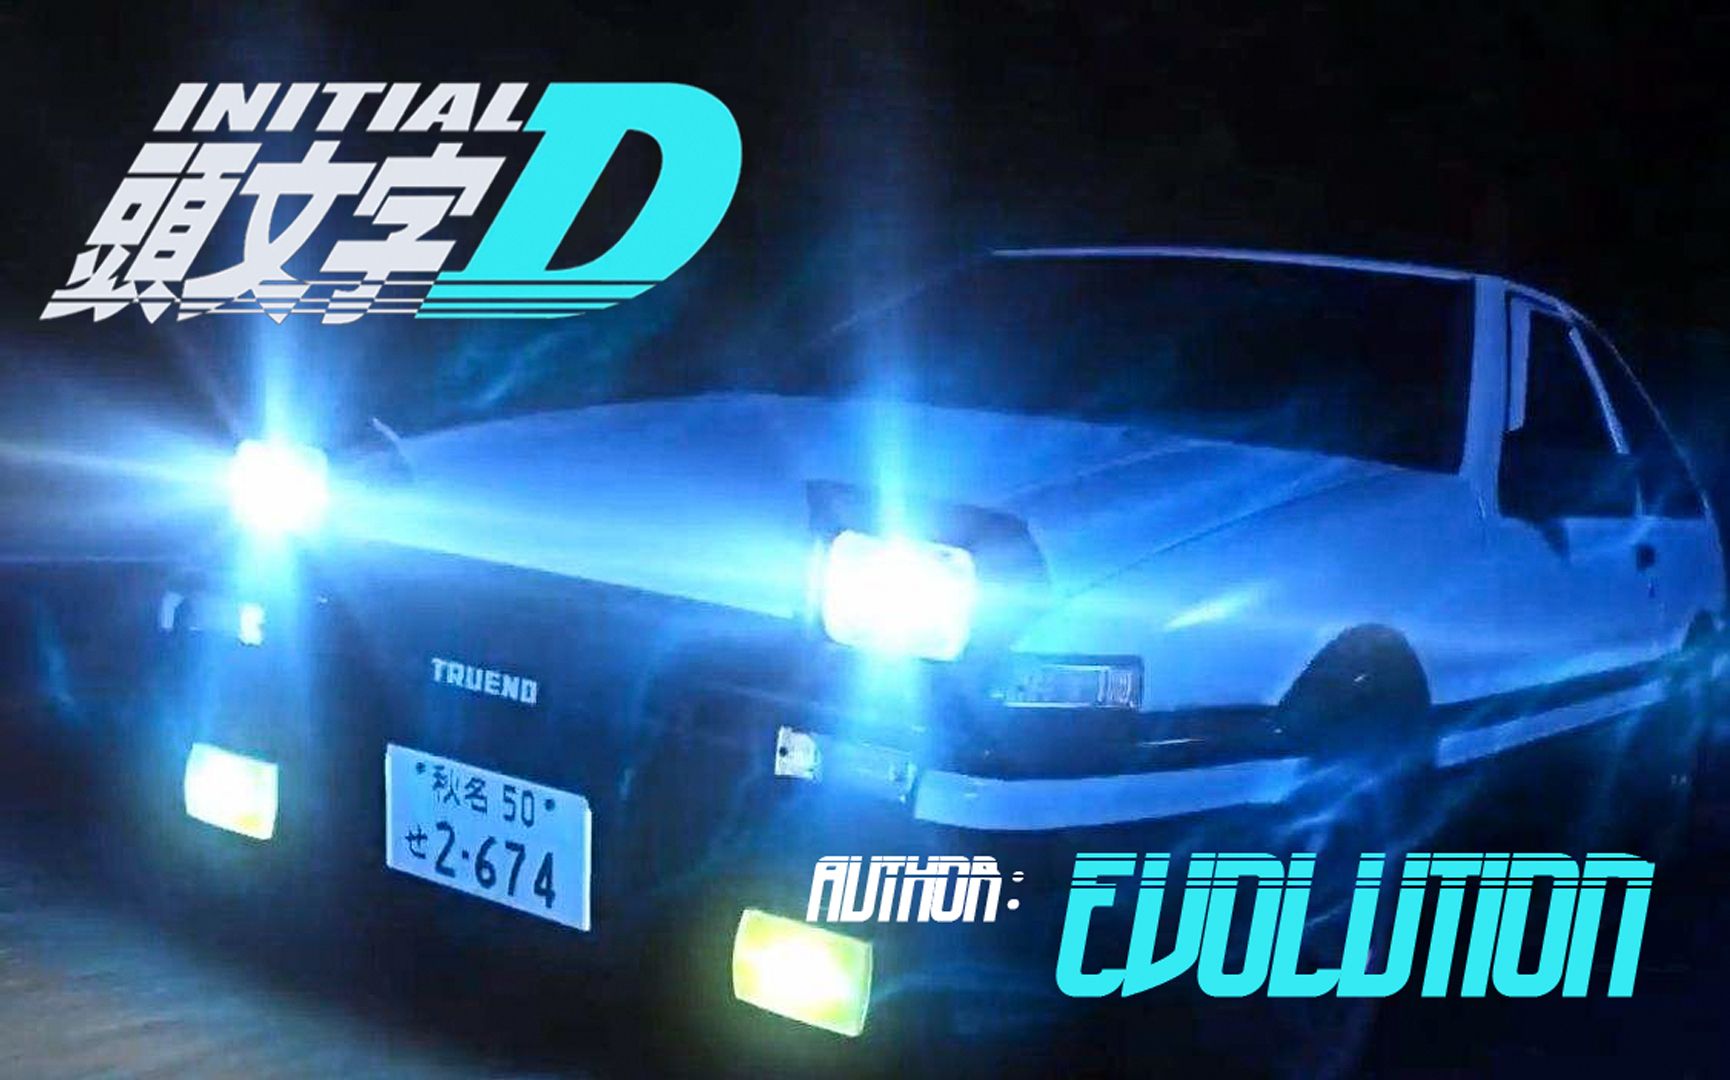 Initial D Wallpapers HD Free download